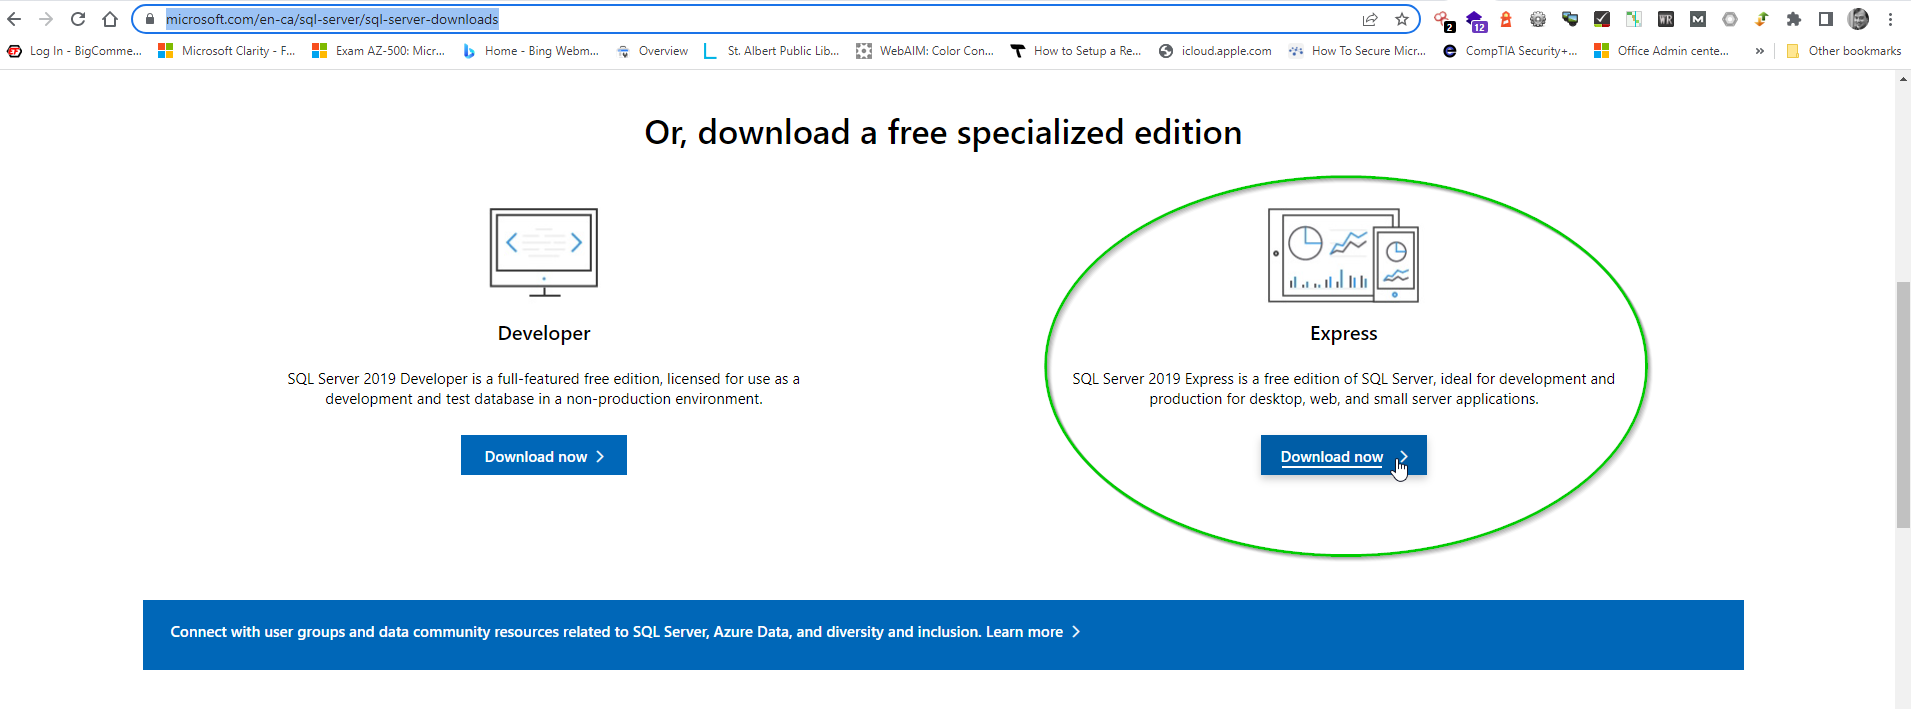 How to download offline content - Microsoft Community